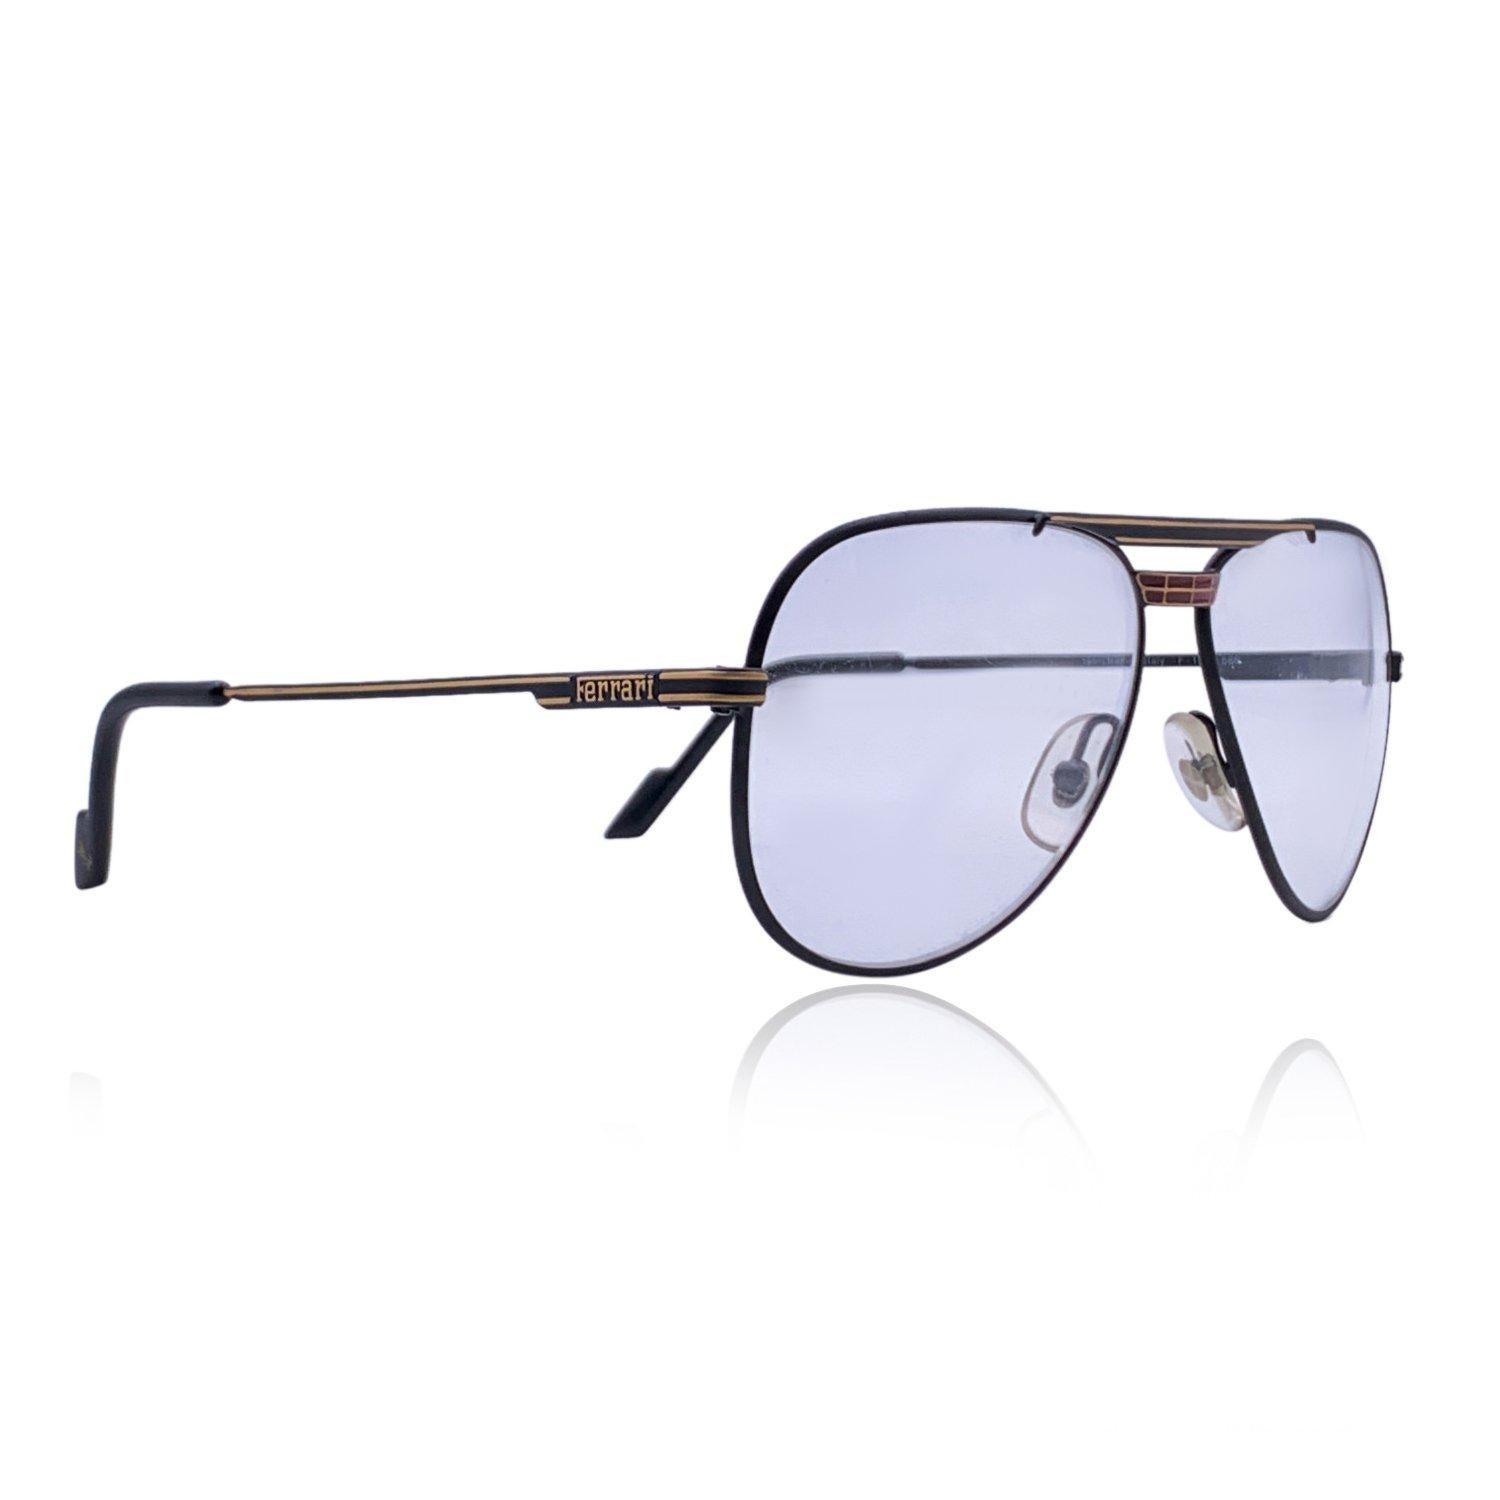 Black metal eyeglasses by Ferrari. Aviator design. Model: F 13/1 - col. 586. Size: 59/13. Enameled accents on the nose bridge. Clear demo lenses. Hand Made in Italy Details MATERIAL: Metal COLOR: Black MODEL: F 13/1 GENDER: Unisex Adults COUNTRY OF